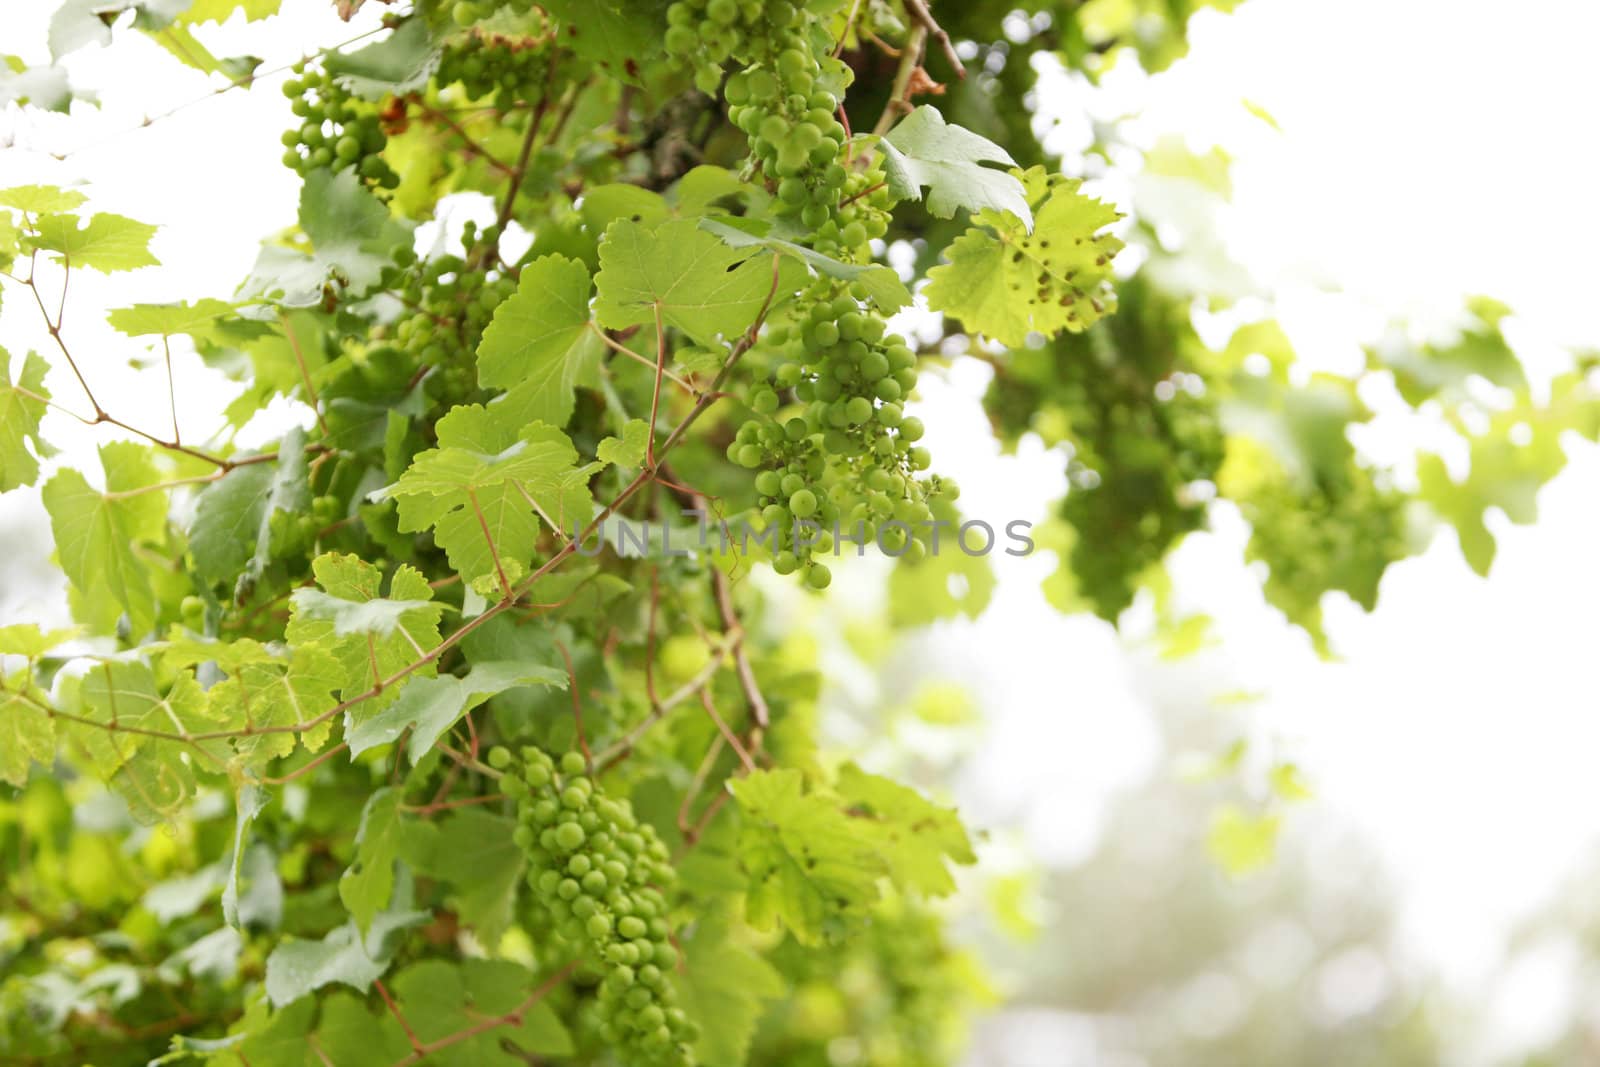 Lots of green grapes on a vine by Farina6000